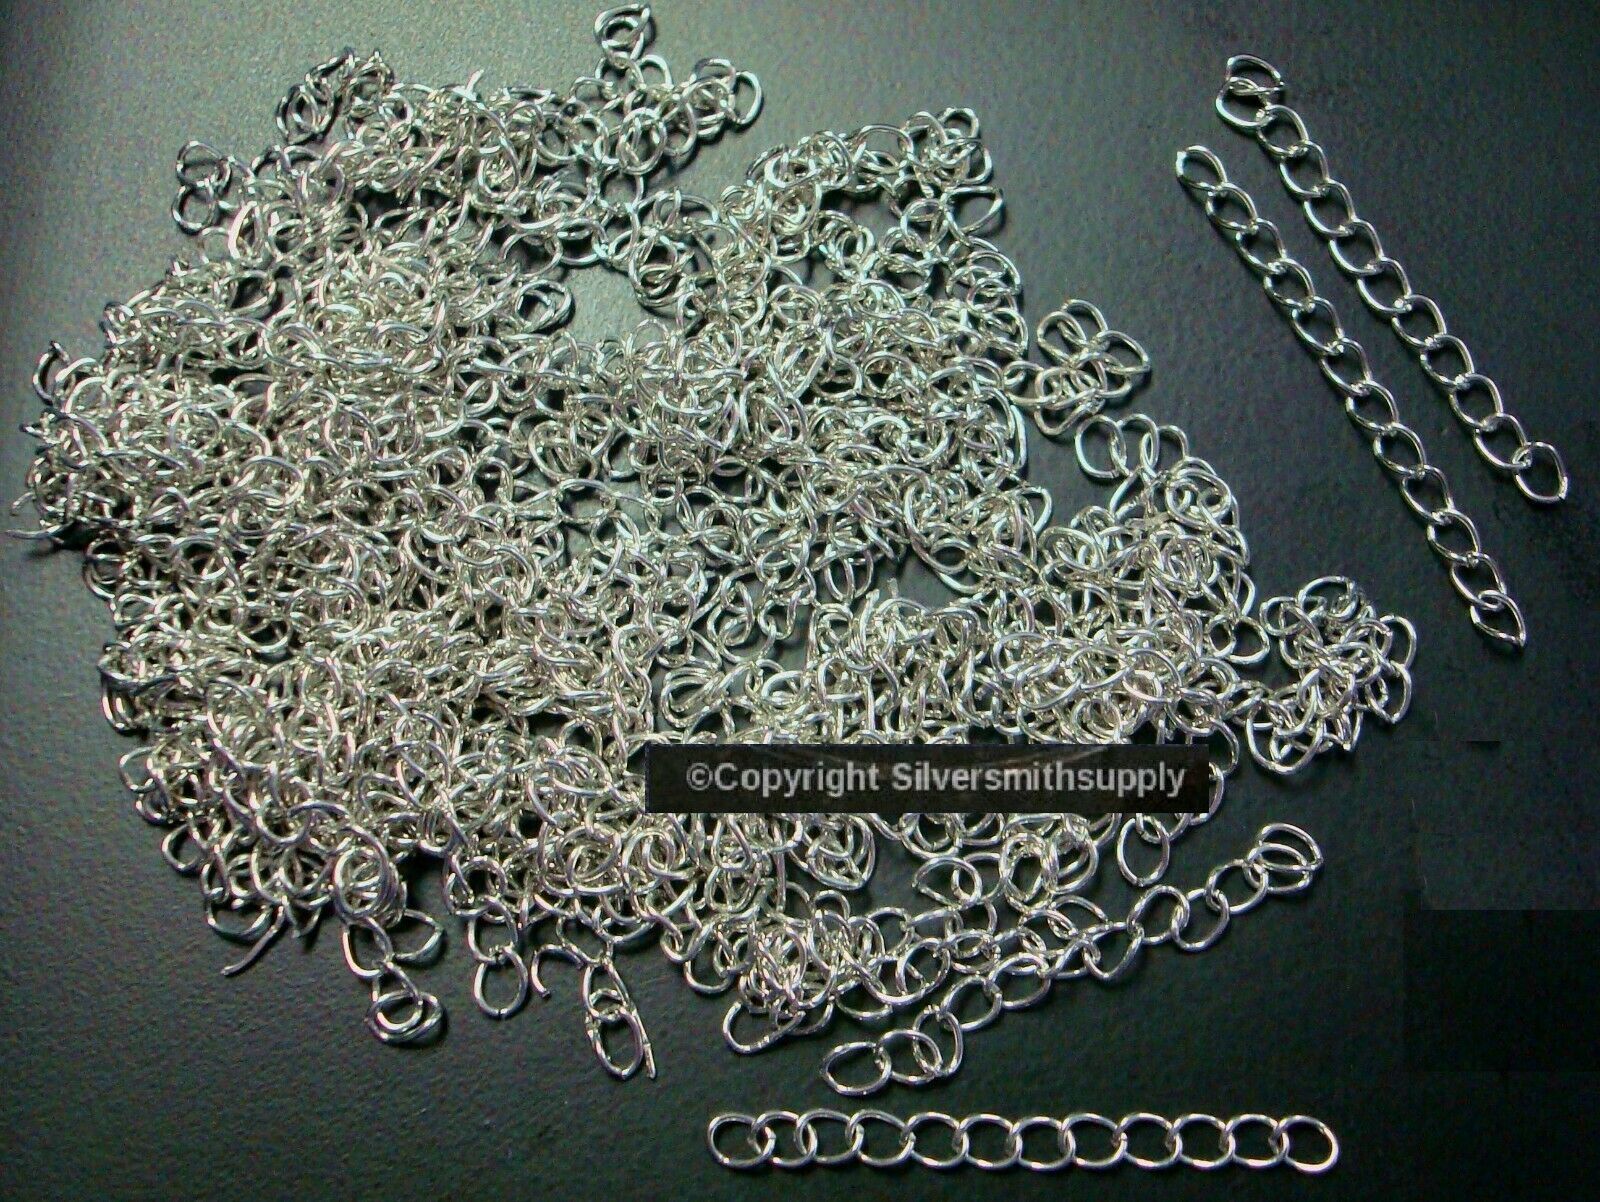 100 White Gold plated 2 twist cable link 5mm necklace extenders 14ft CH102